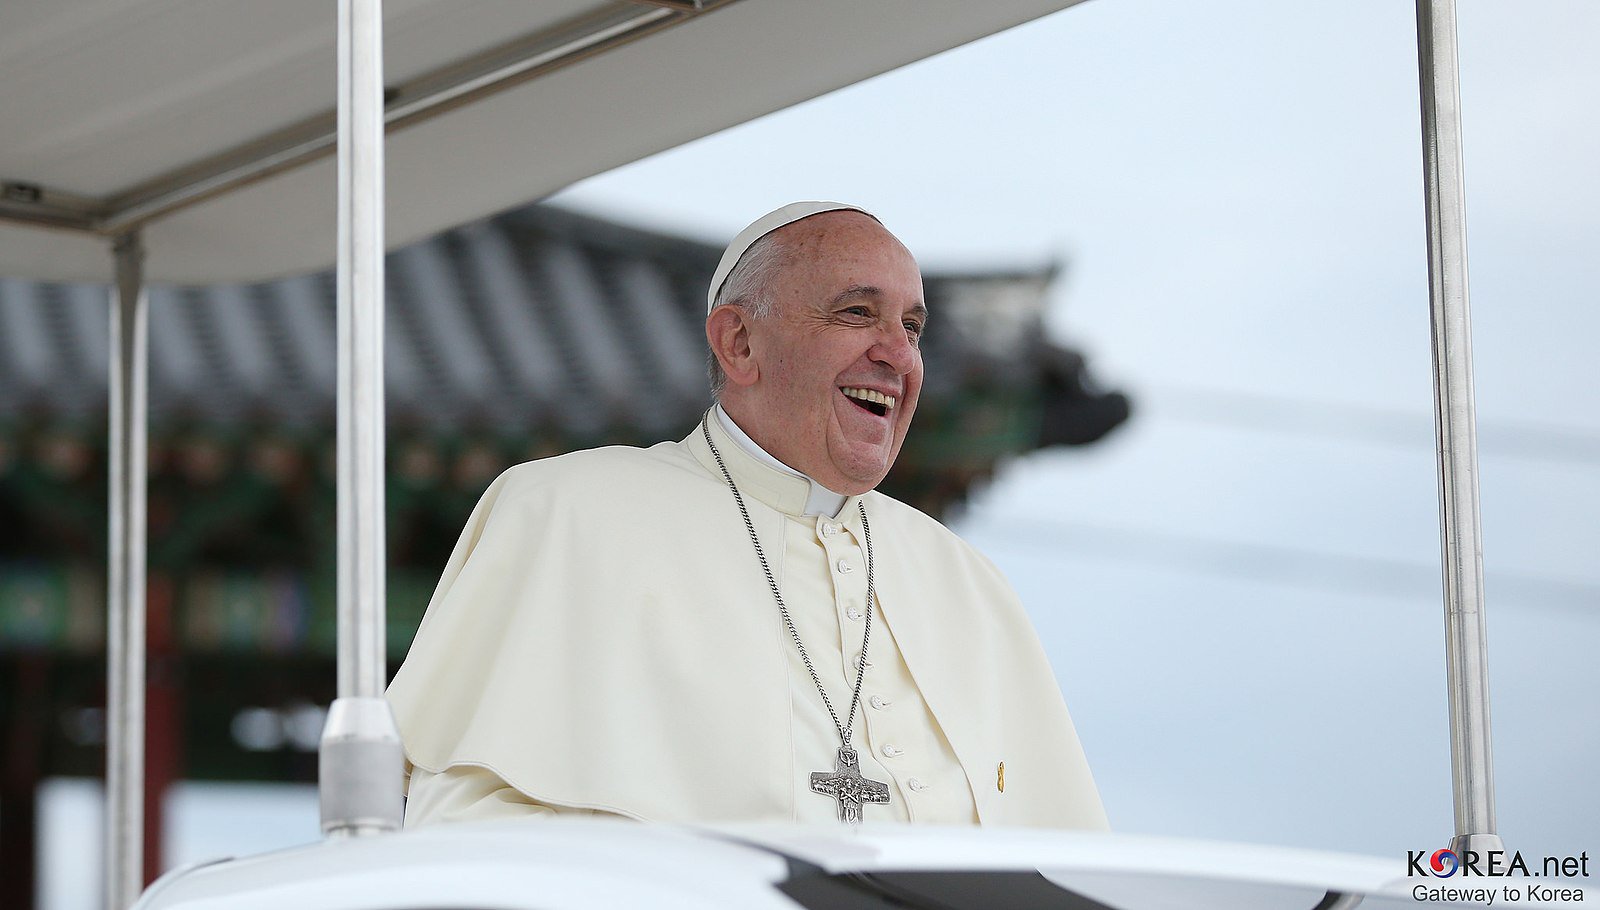 Pope Francis celebrates 10 years of pontificate with cardinals and podcast